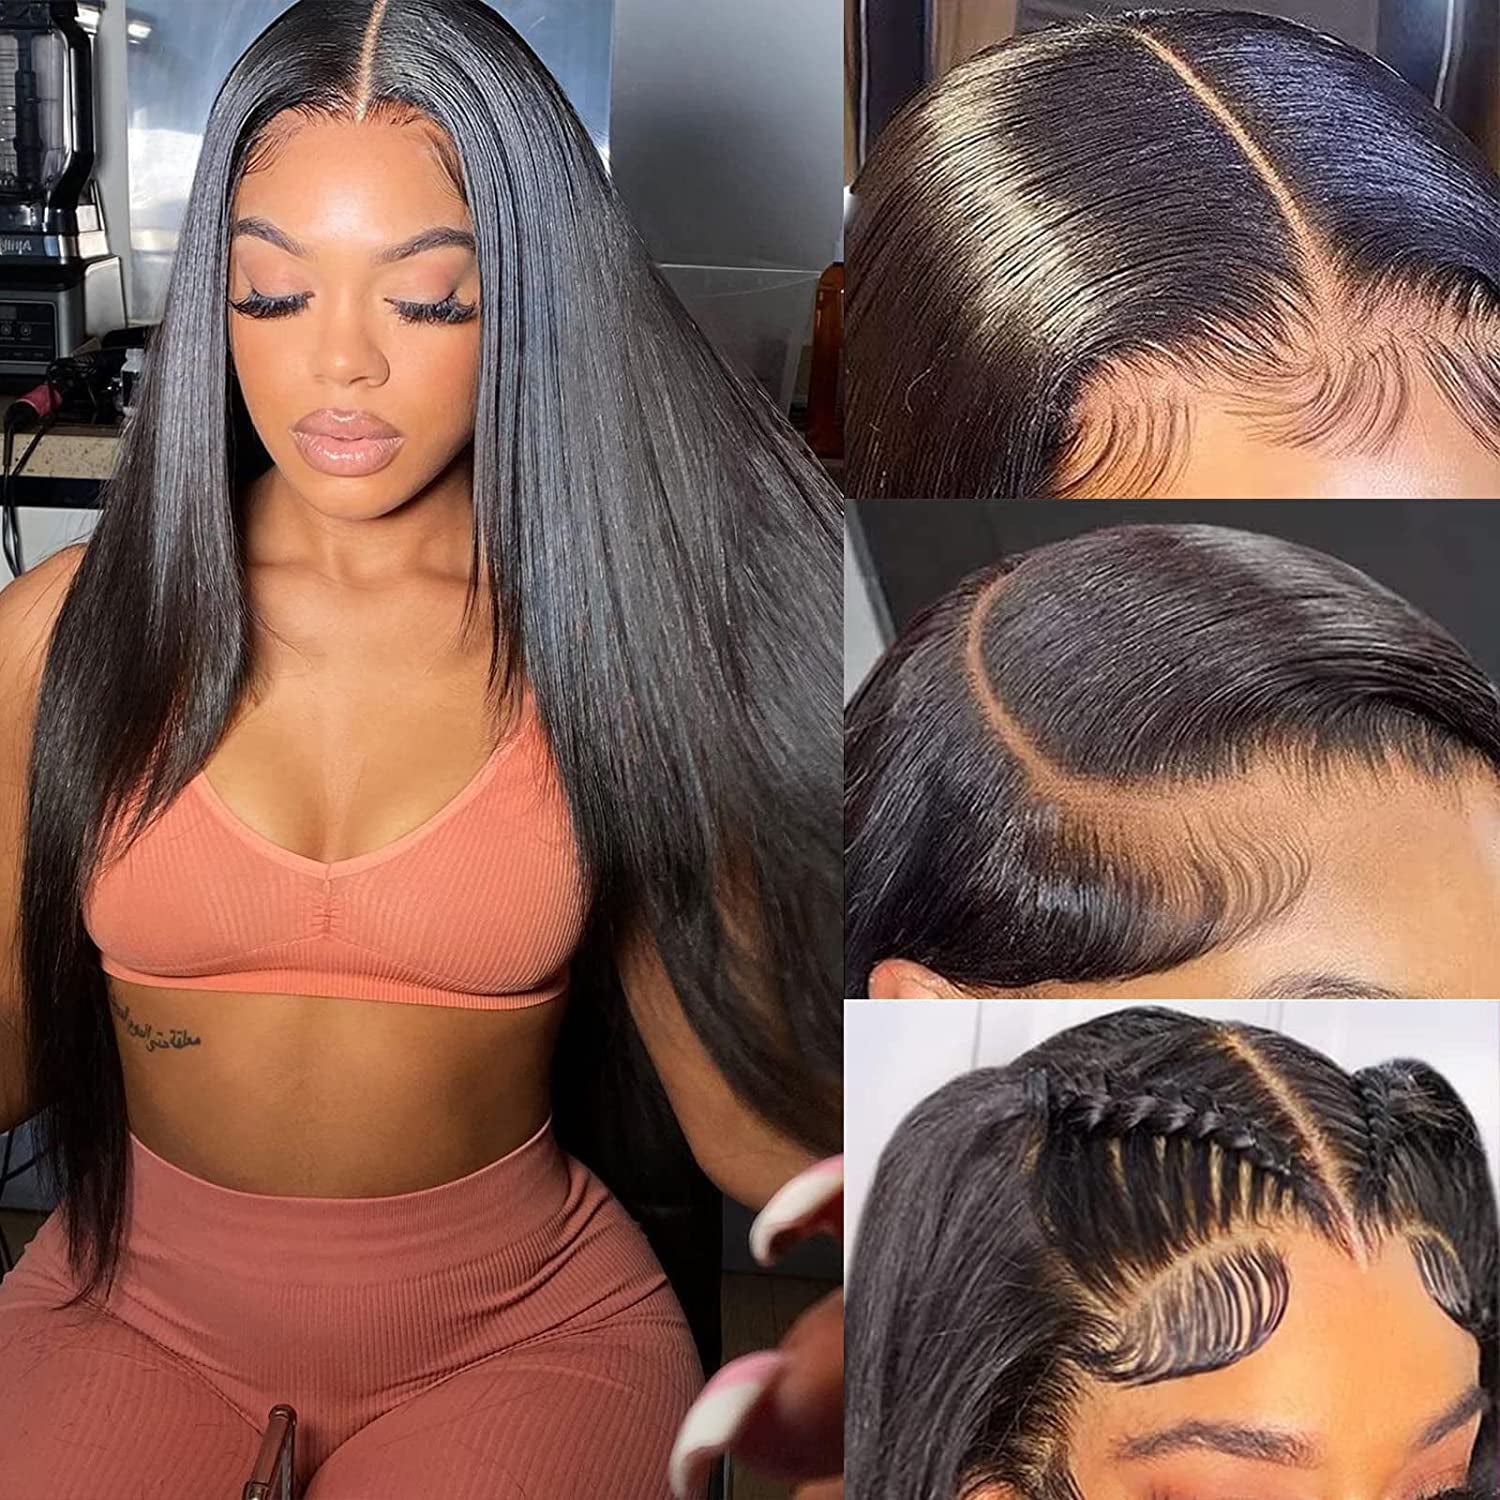 Straight Lace Front Wigs Human Hair - 13X4 Transparent HD Lace Front Wigs Human Hair Pre Plucked, 150% Density Brazilian Virgin Straight Frontal Wigs Human Hair with Baby Hair for Women (26Inch, Straight Lace Front Wigs Human Hair)